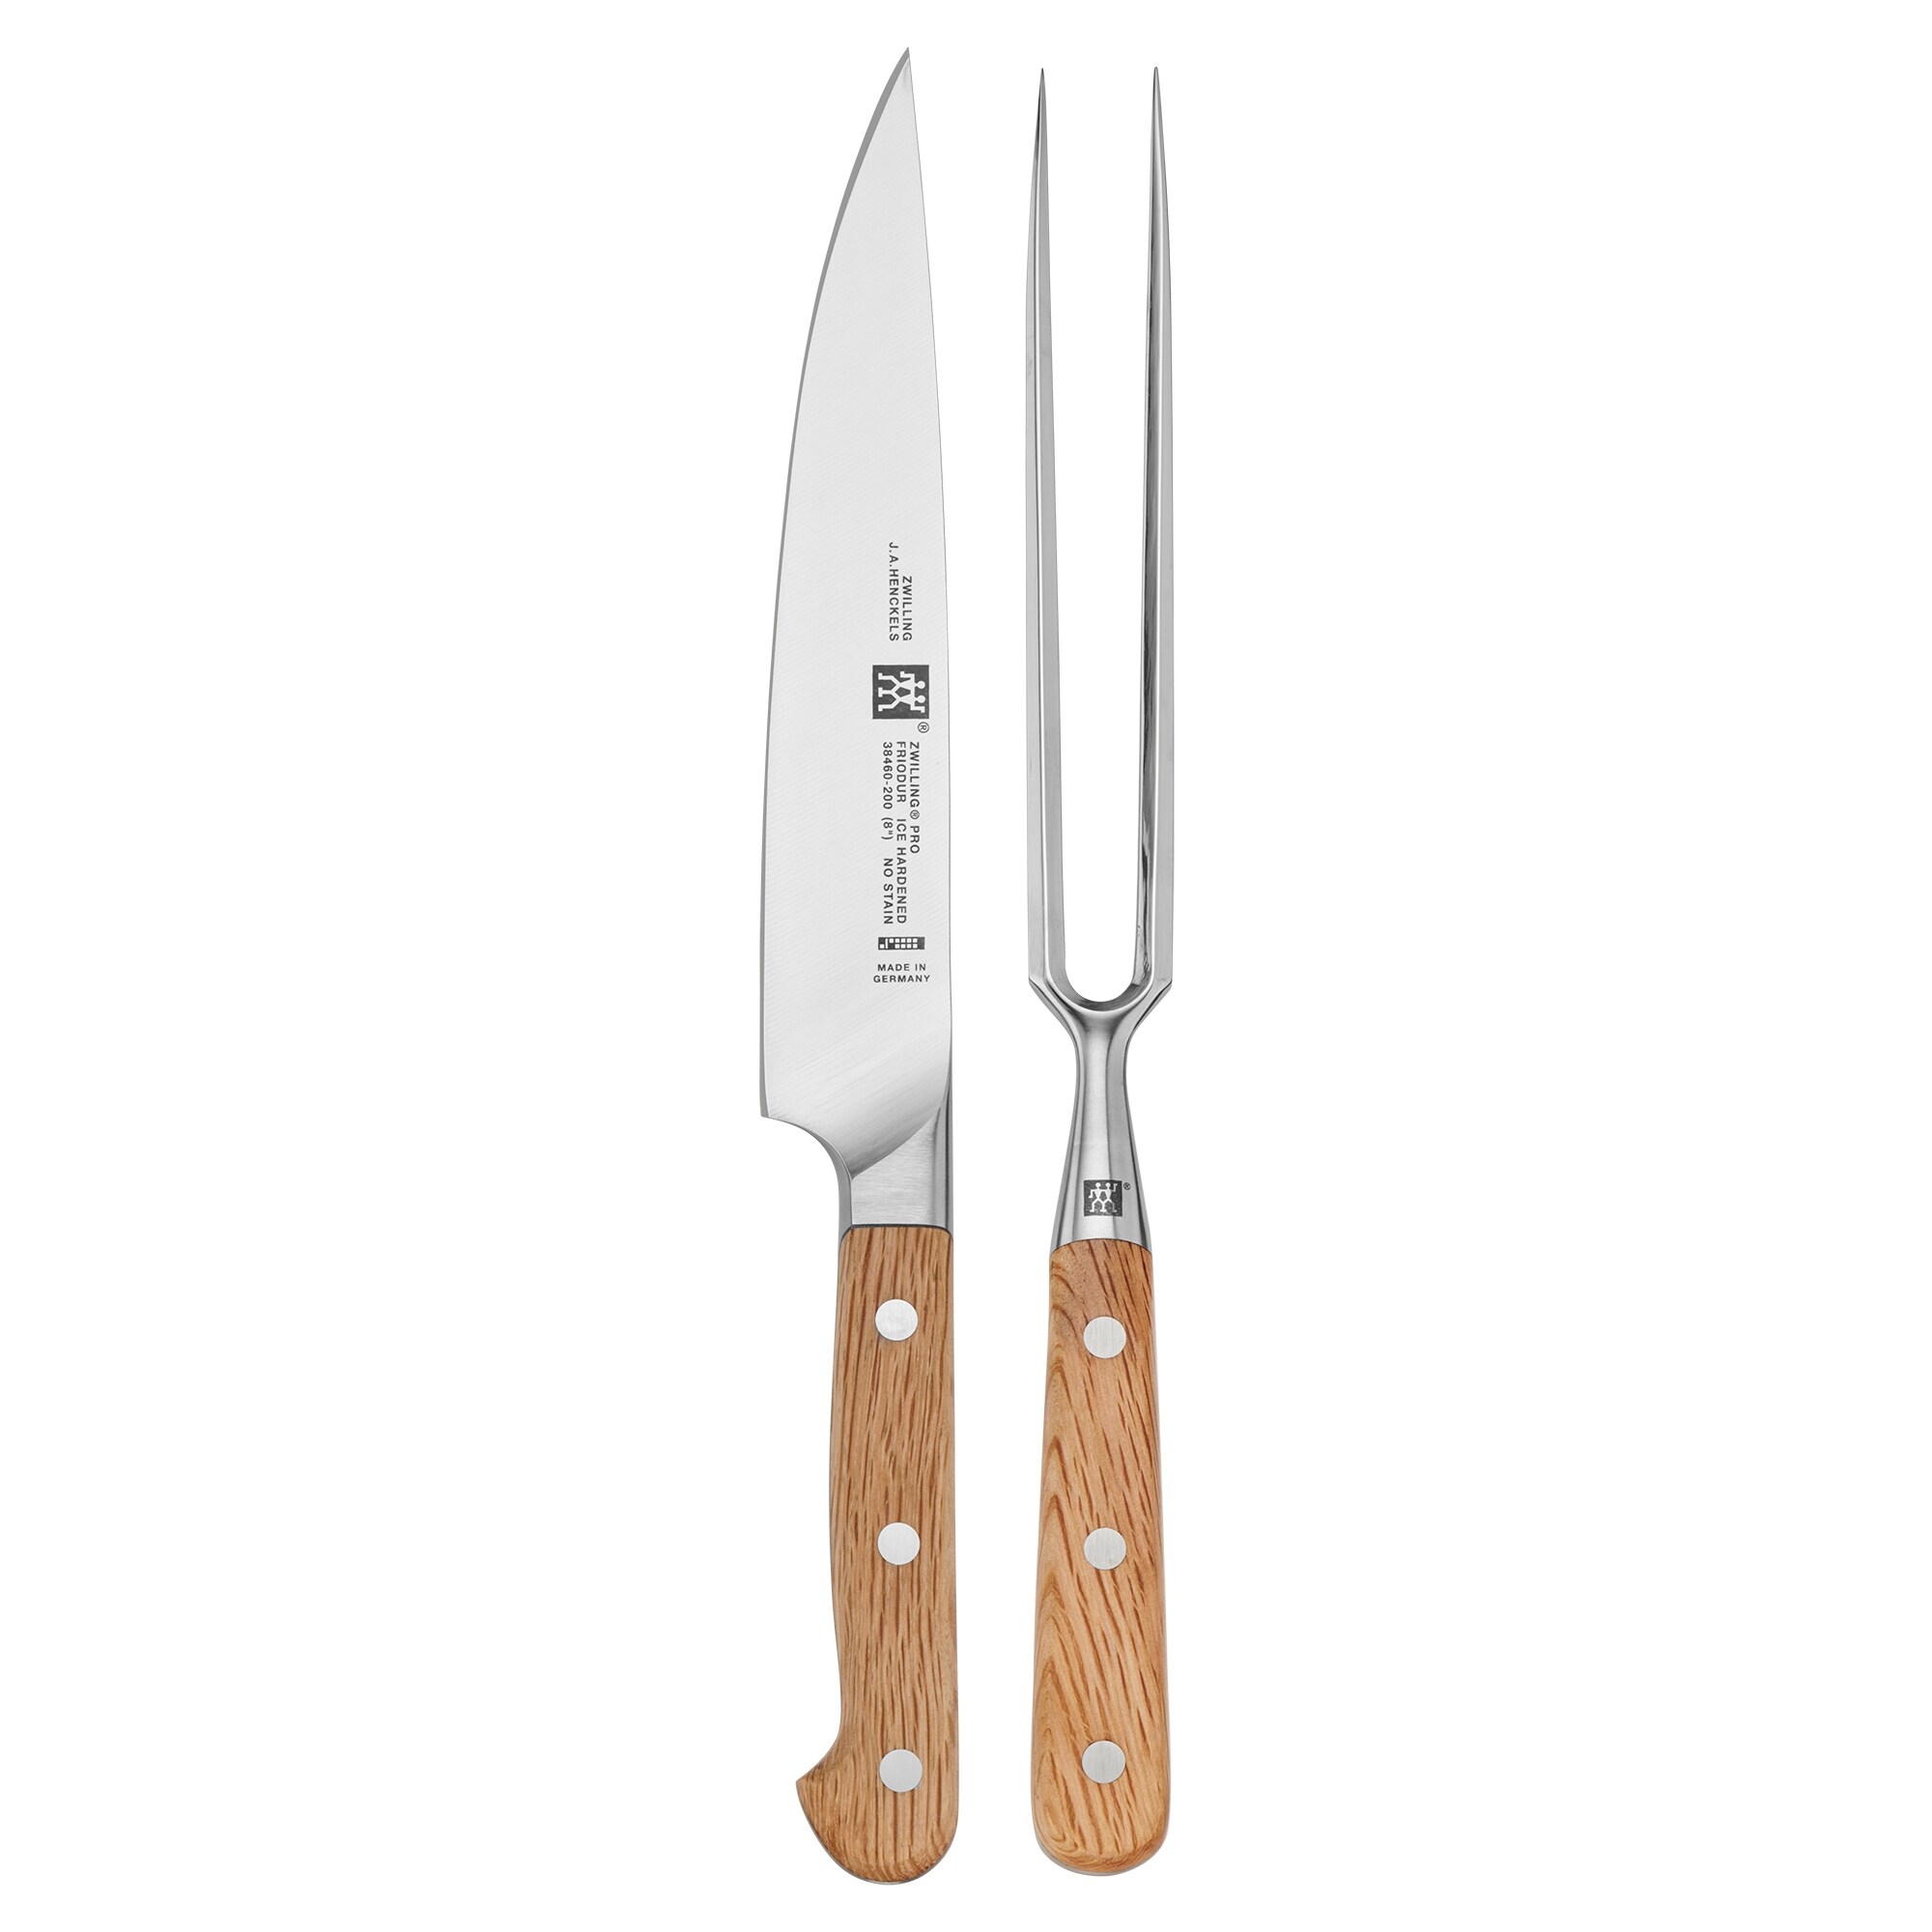 https://ak1.ostkcdn.com/images/products/is/images/direct/6dc3e81d8e62f64412ccb8cb9d81e8fcd8fa1dda/ZWILLING-Pro-Holm-Oak-2-pc-Carving-Knife-%26-Fork-Set.jpg